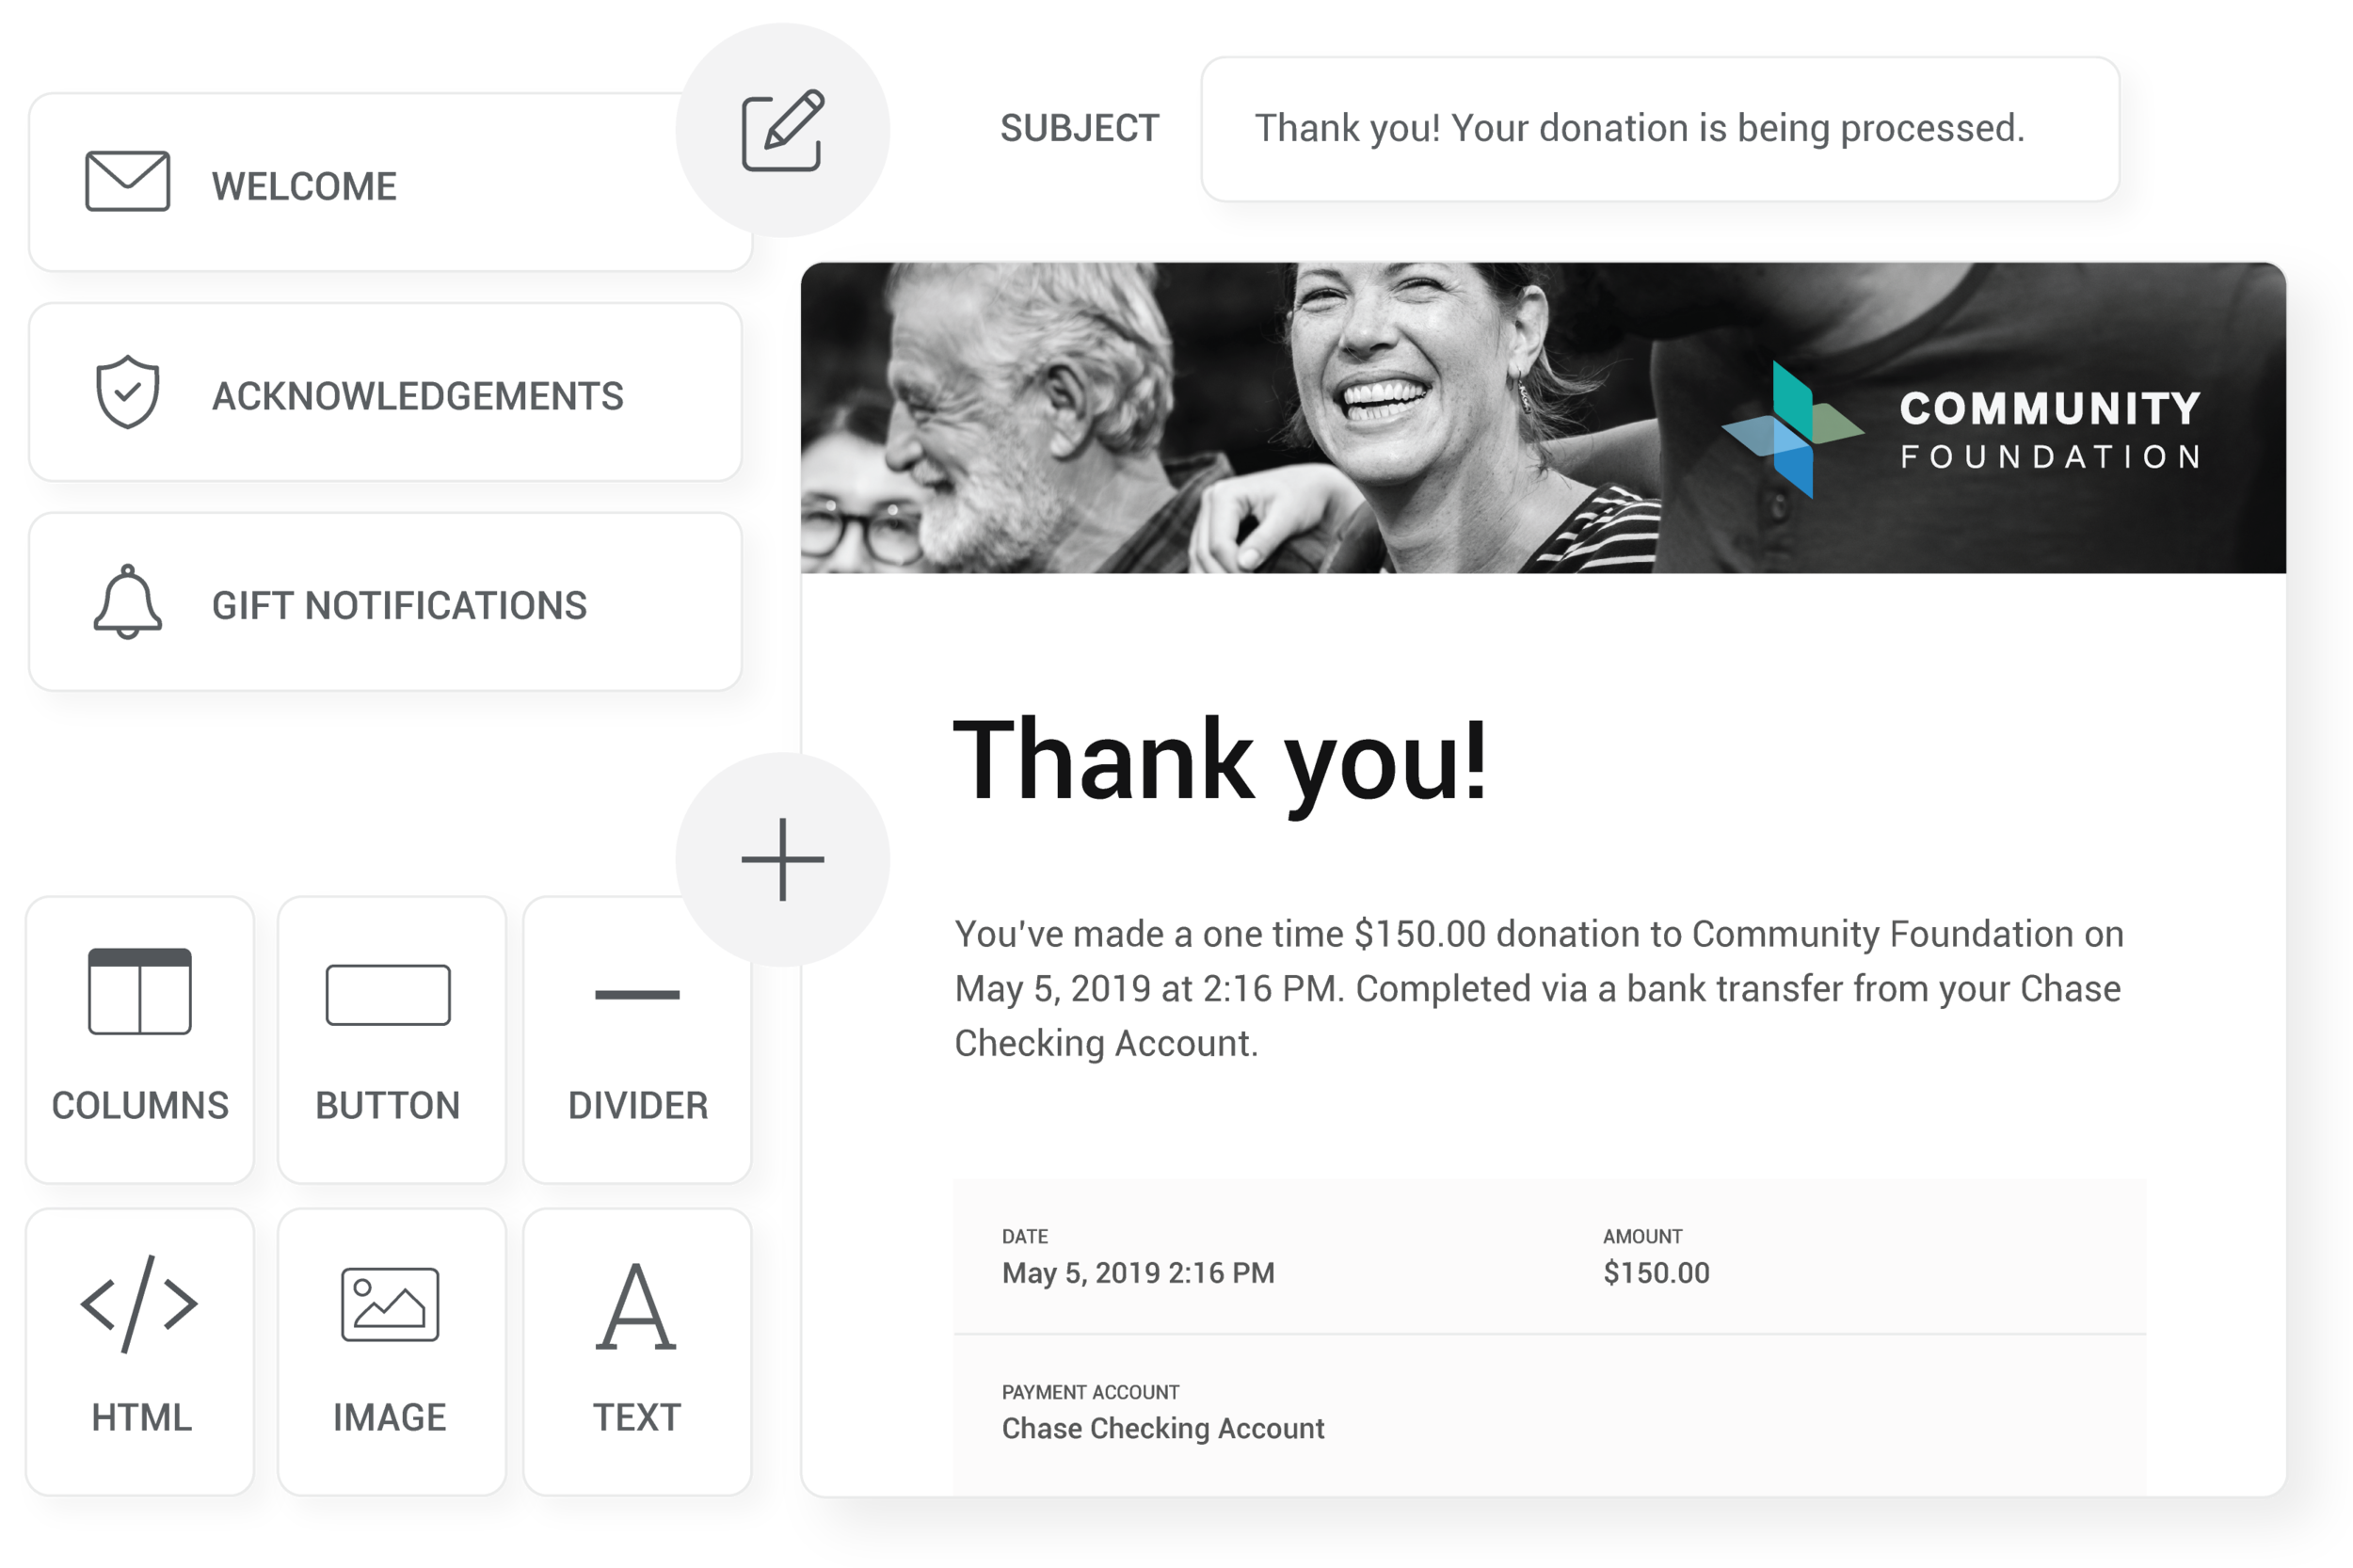 Outreach designed to save you time - Your donors will automatically receive welcome, acknowledgement and gift notification emails. Customize the look and message in no time.